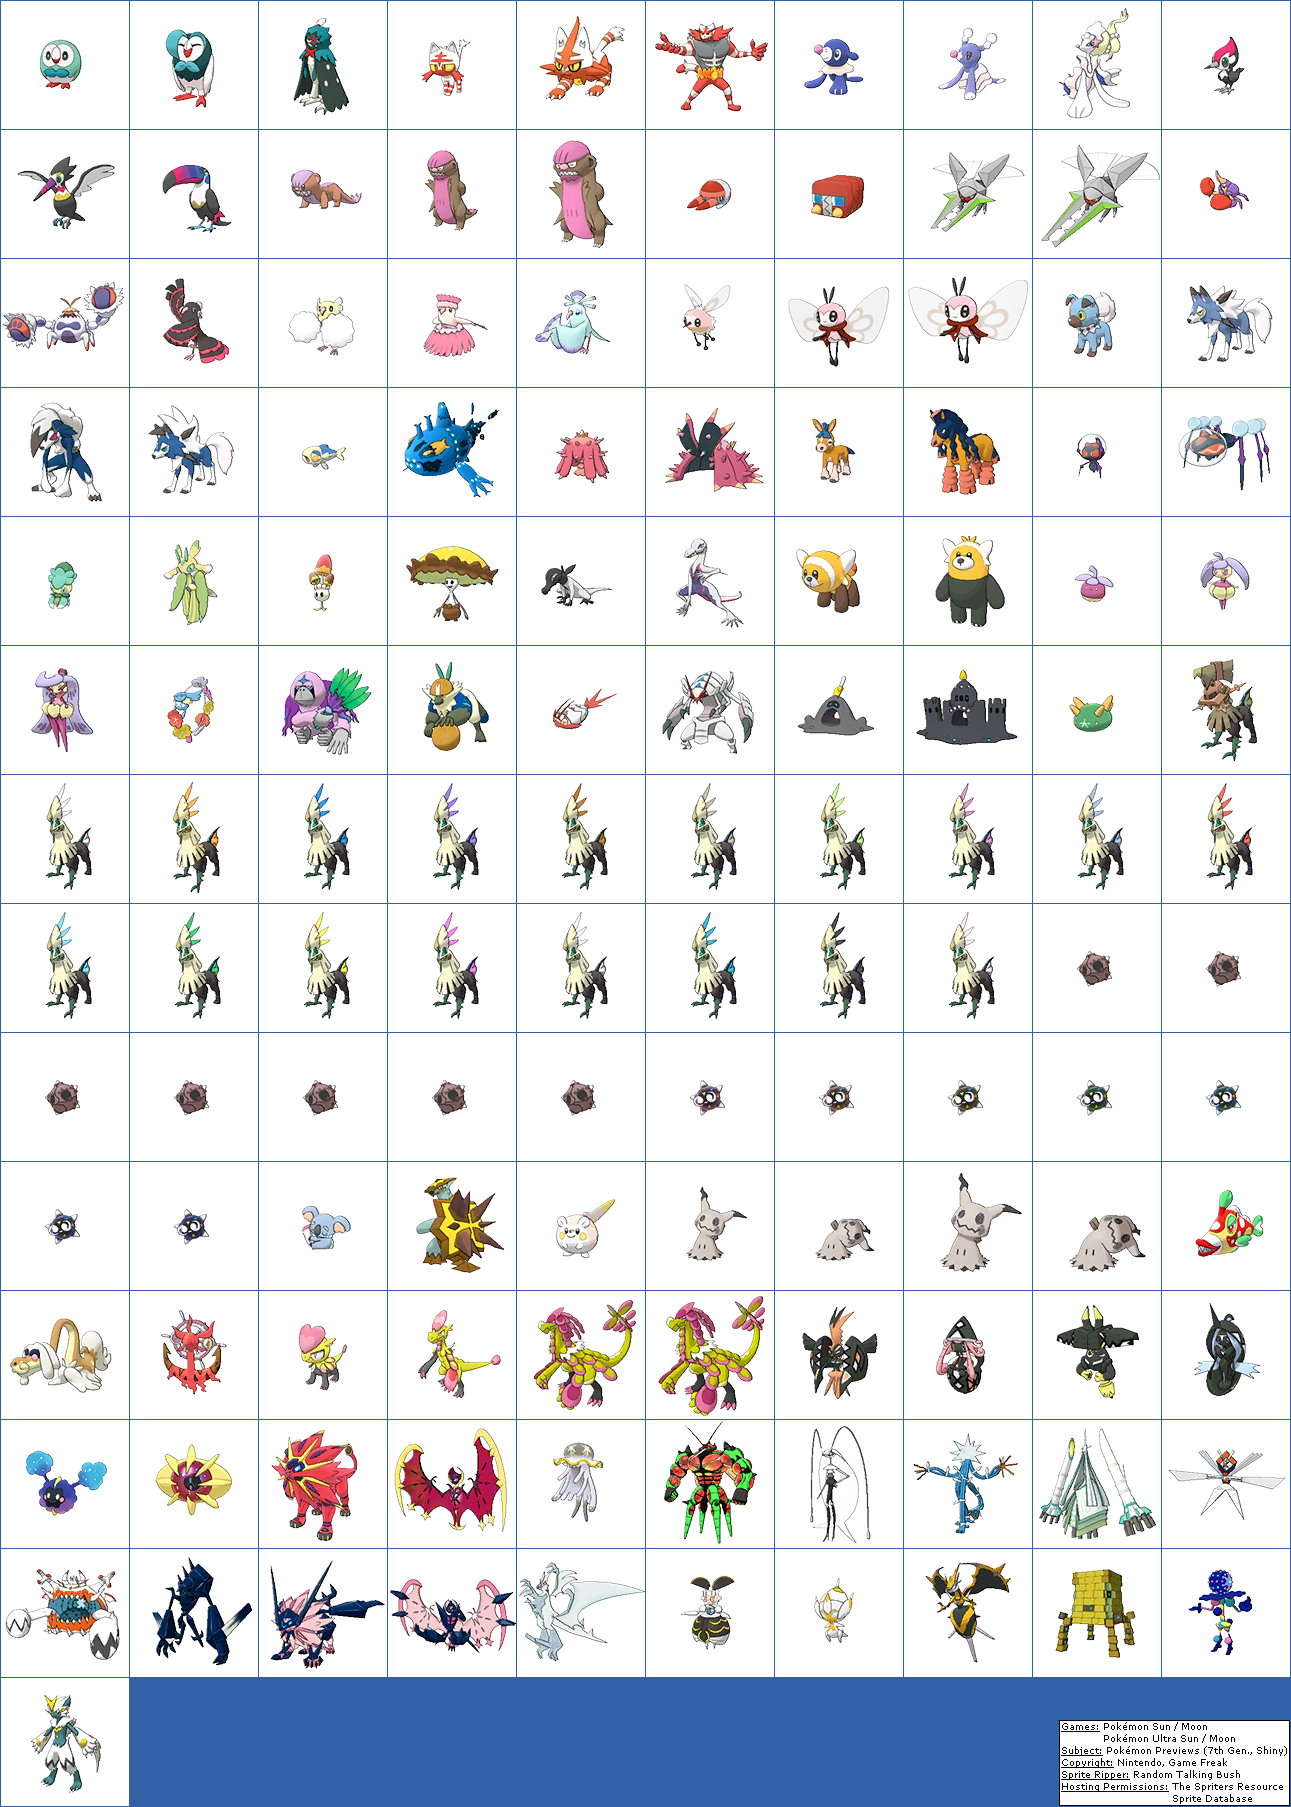 Gen 7 Sprite List WITH shiny forms (Excluding all Silvally forms)